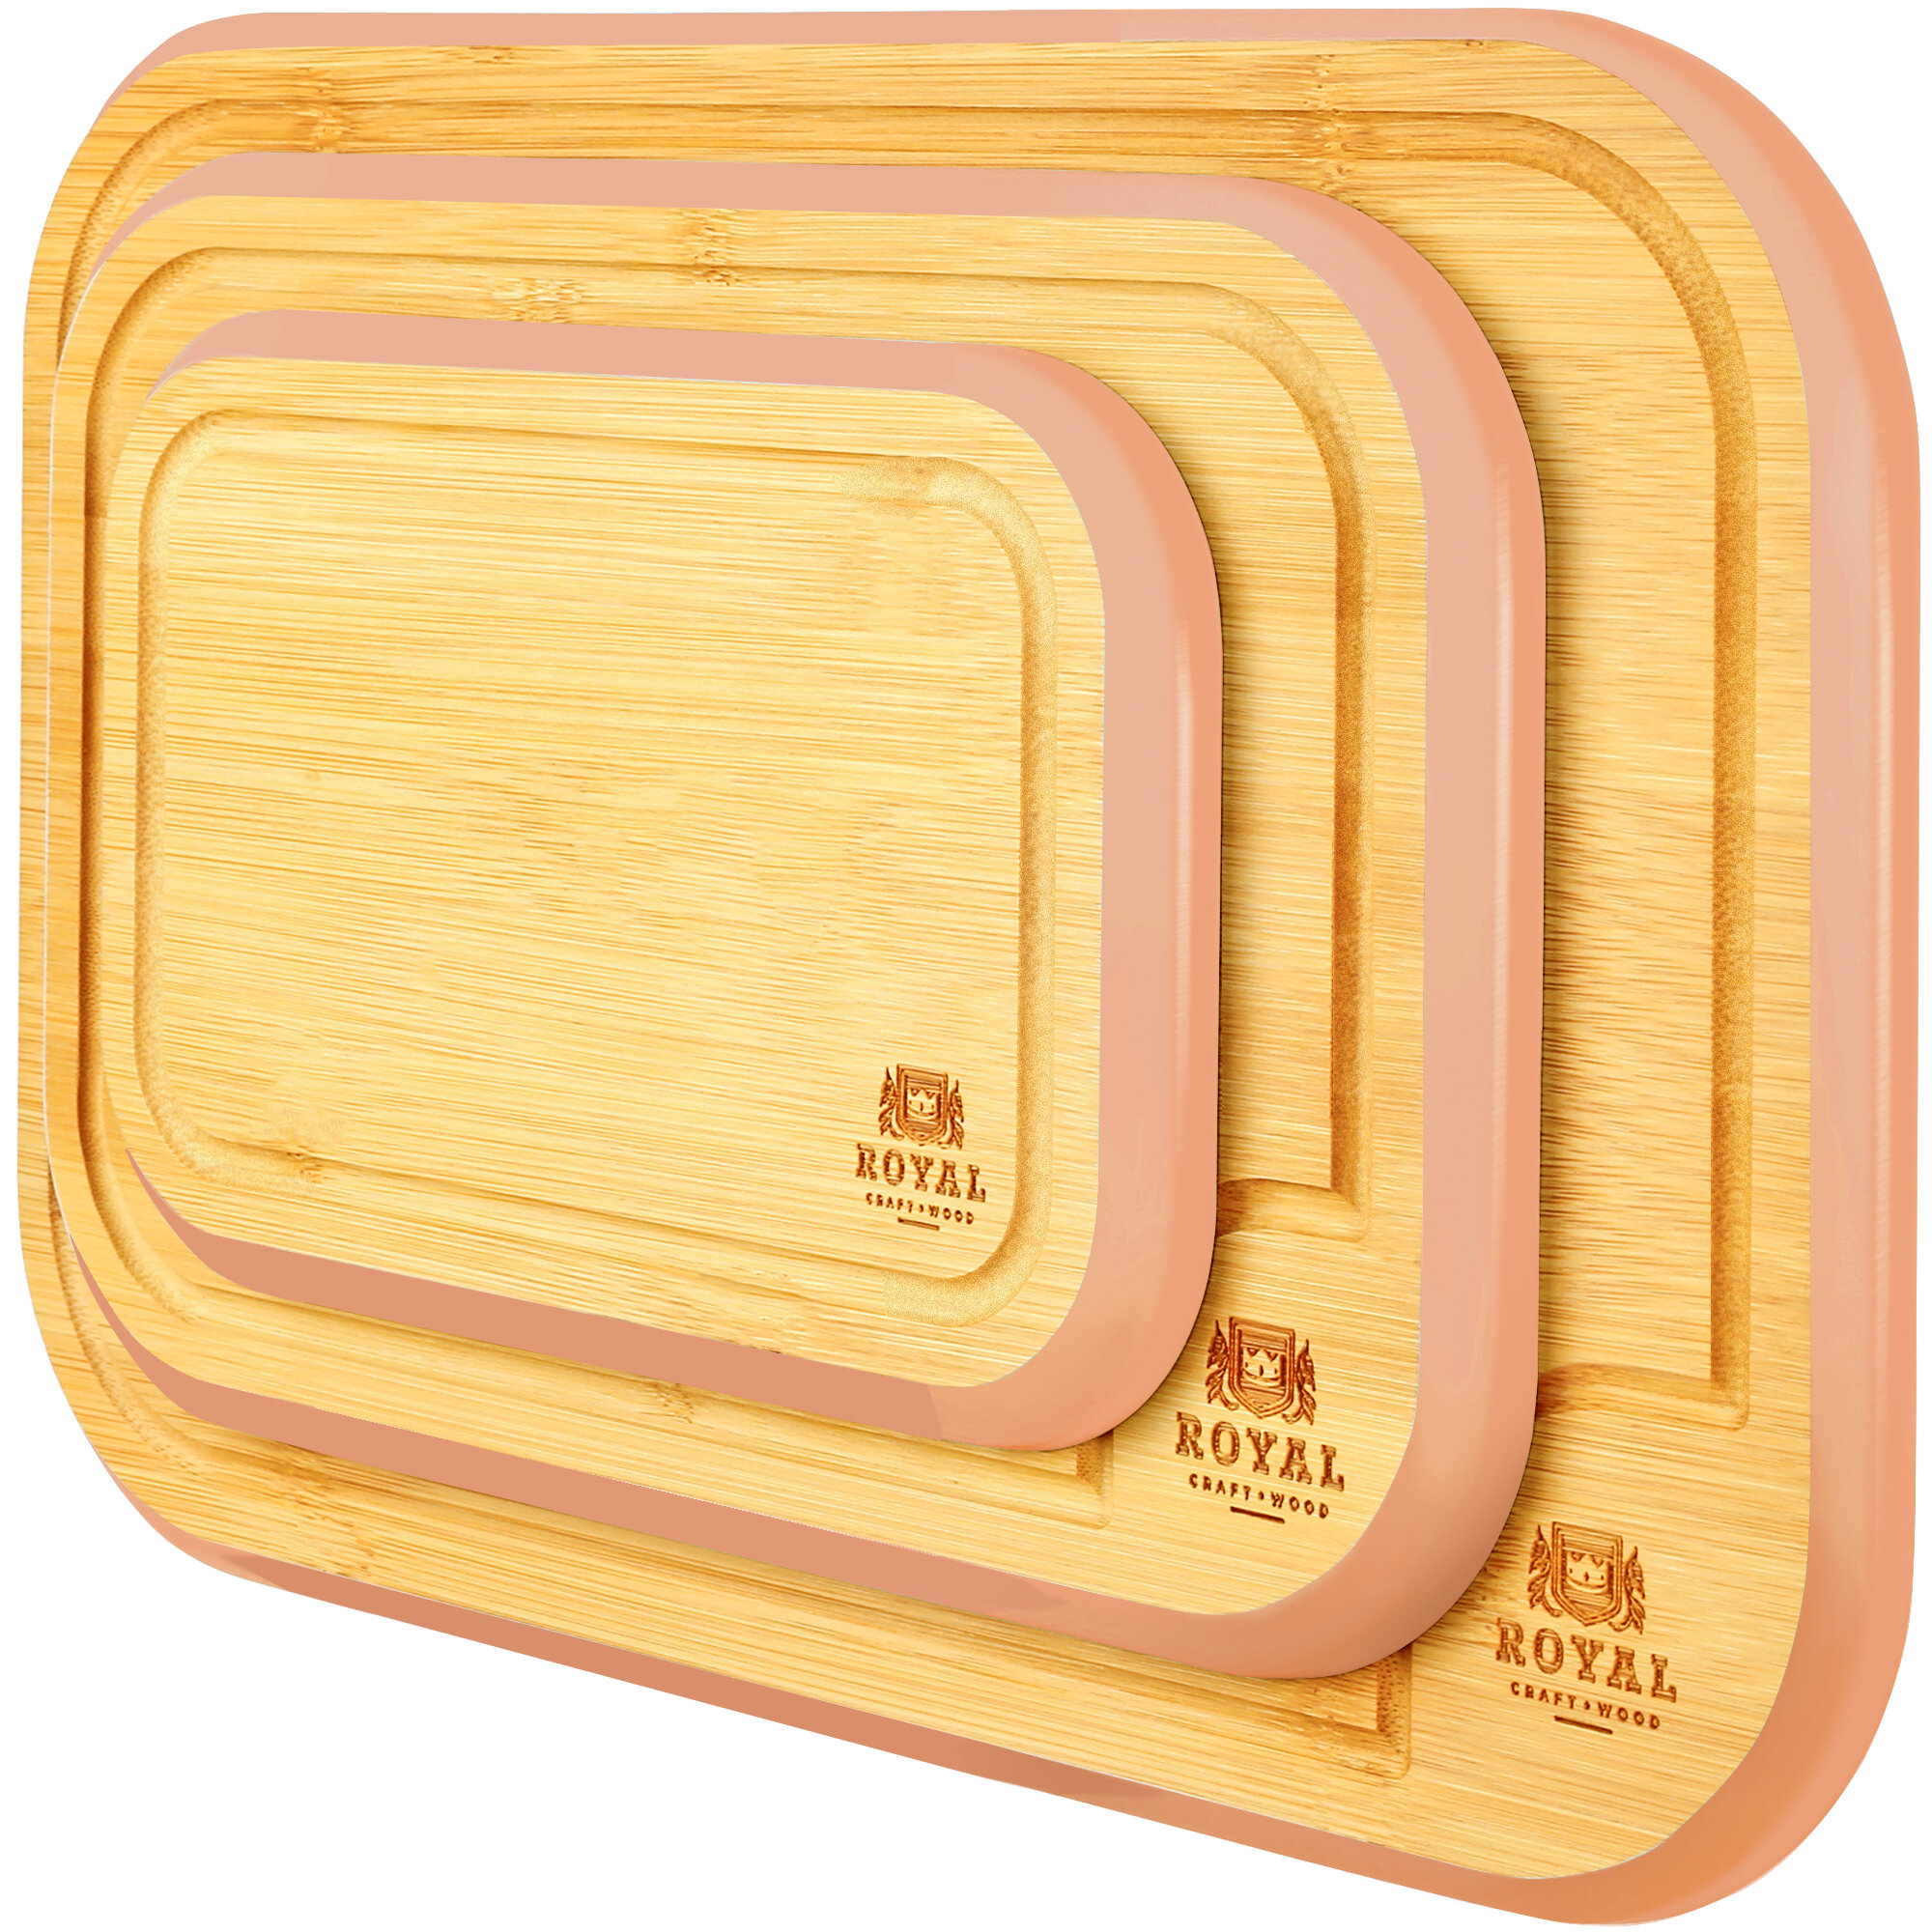 Farberware 12-Inch x 16-inch Bamboo Cutting Board with Metal Handles, Multicolor